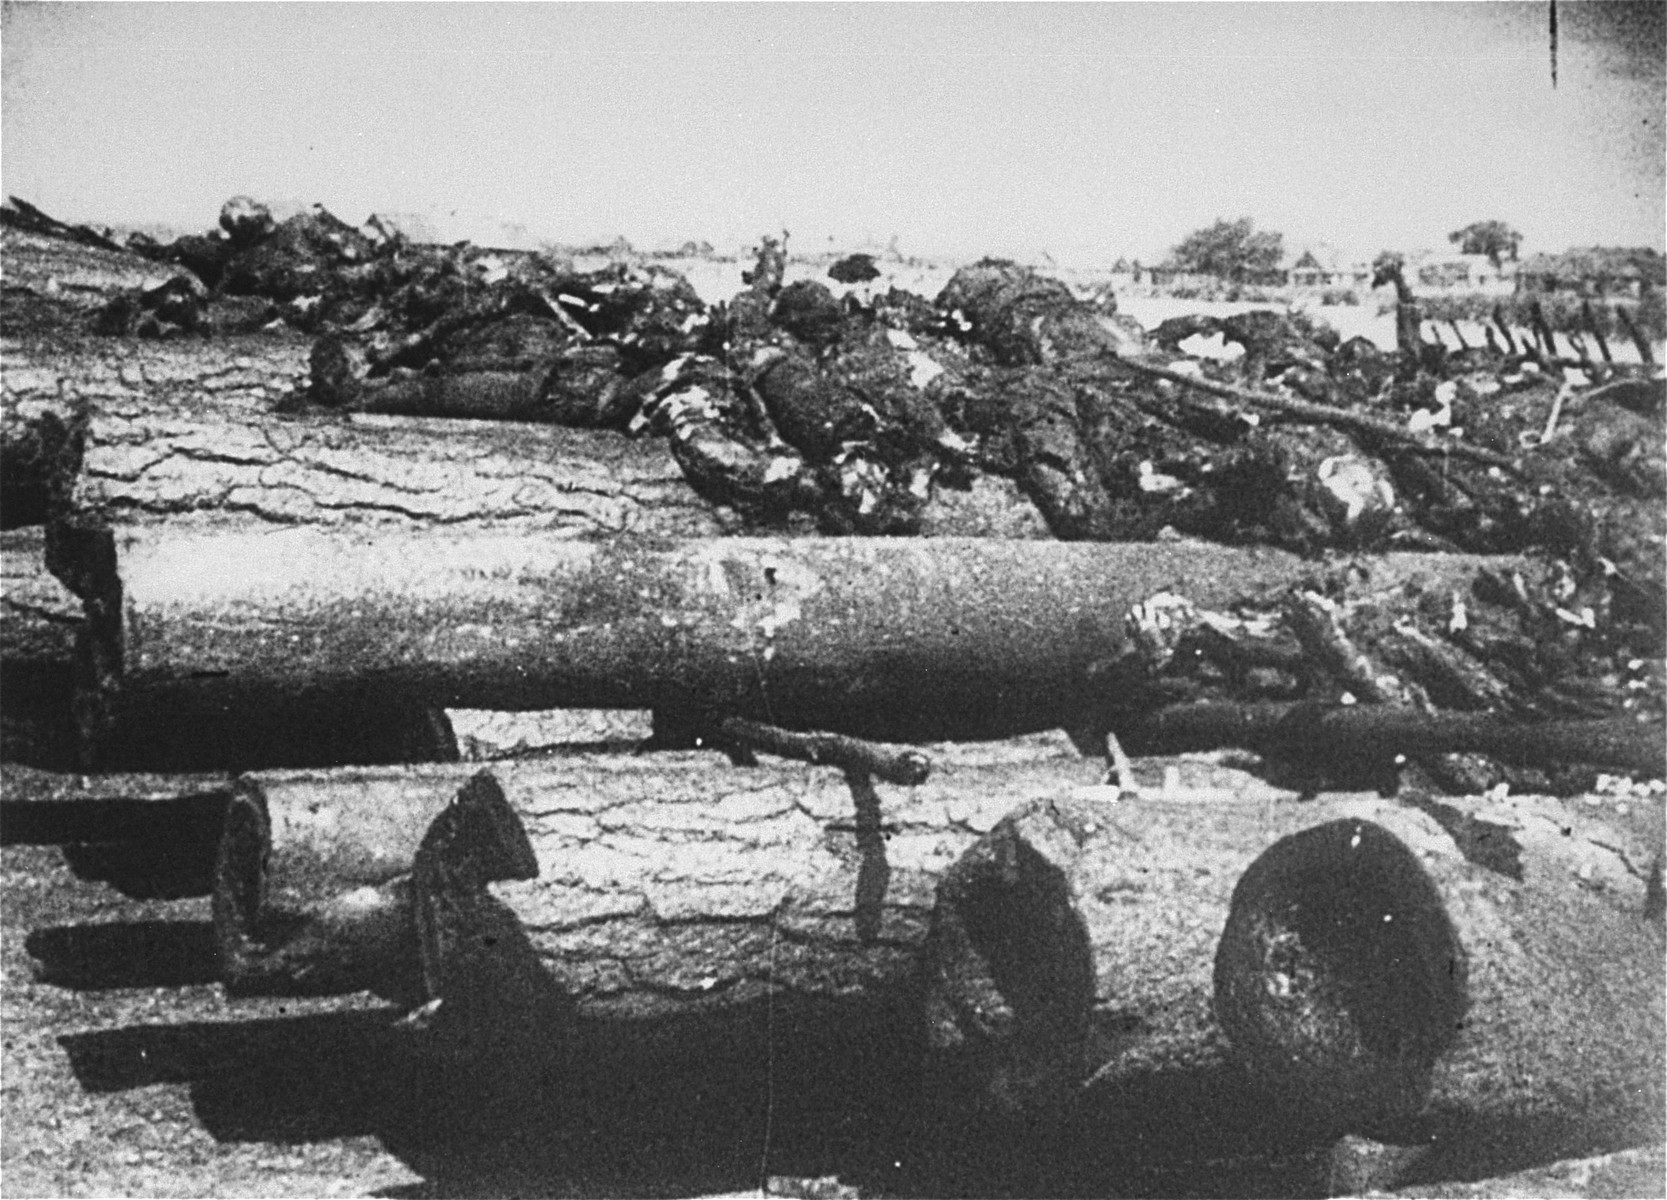 The charred remains of prisoners burned by the Germans before the liberation of the Maly Trostinets concentration camp.